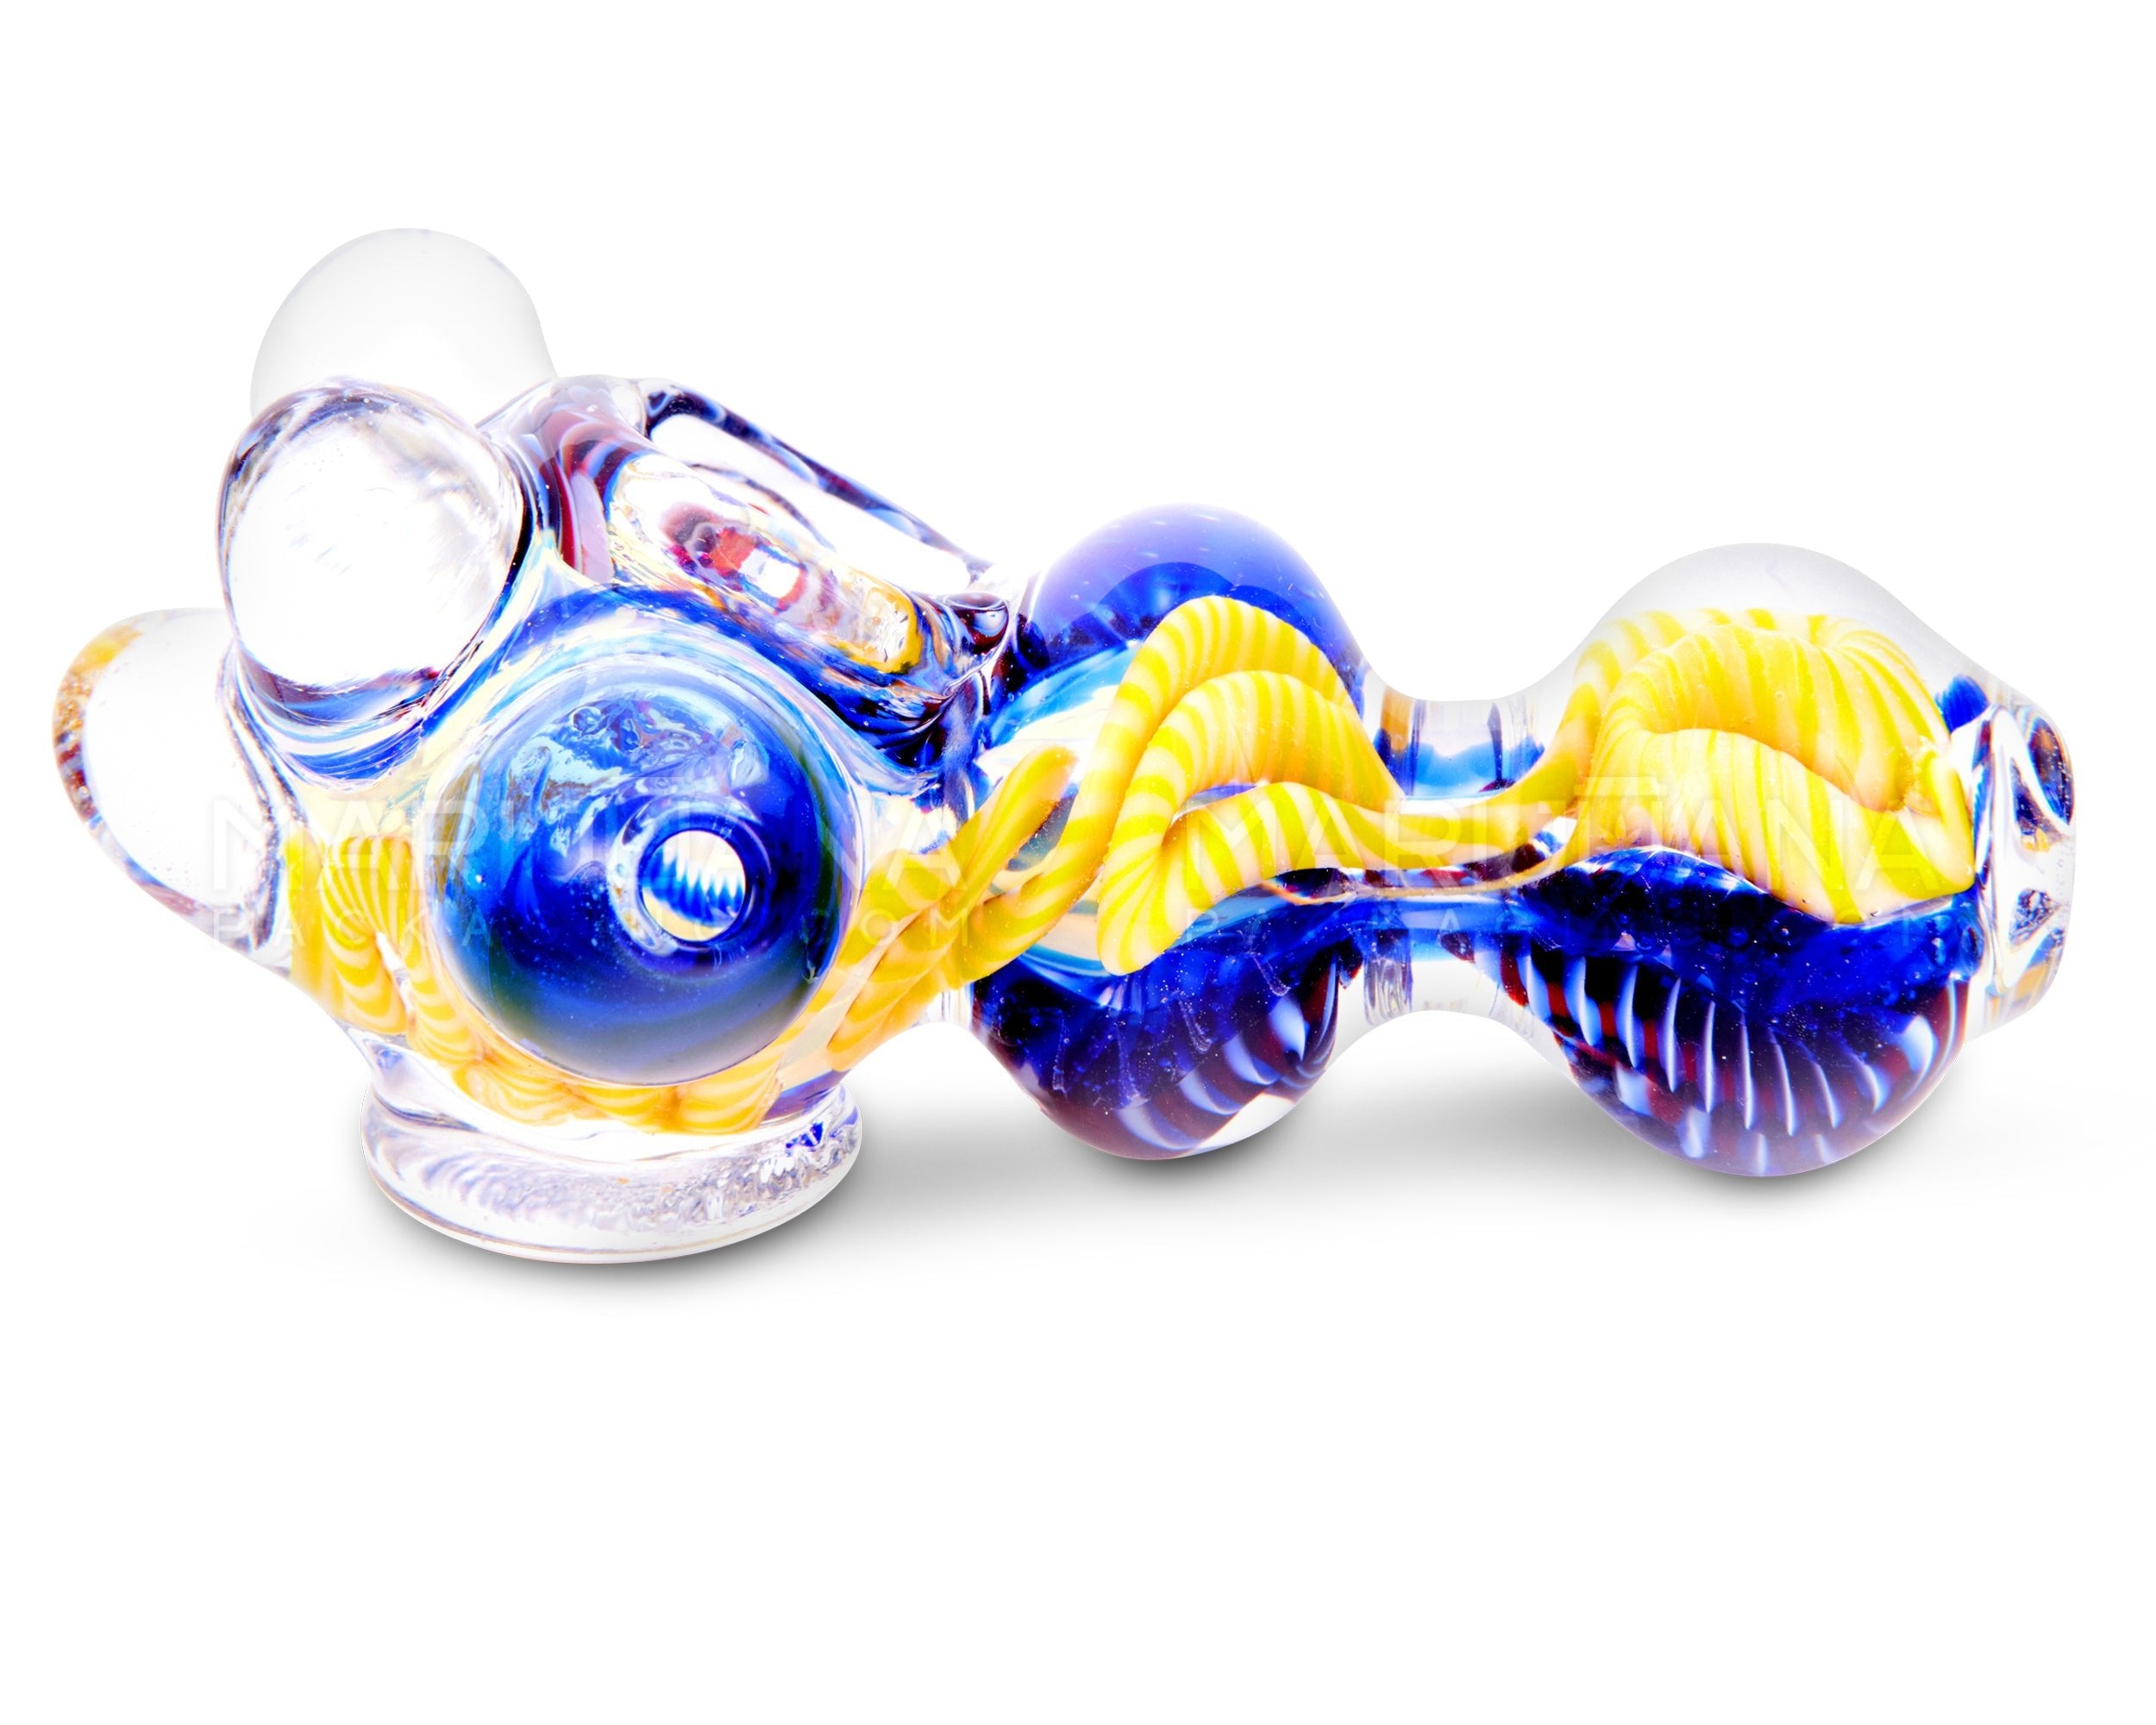 Swirl & Fumed Bulged Spoon Hand Pipe w/ Multi Knockers & Ribboning | 4.5in Long - Glass - Assorted - 5